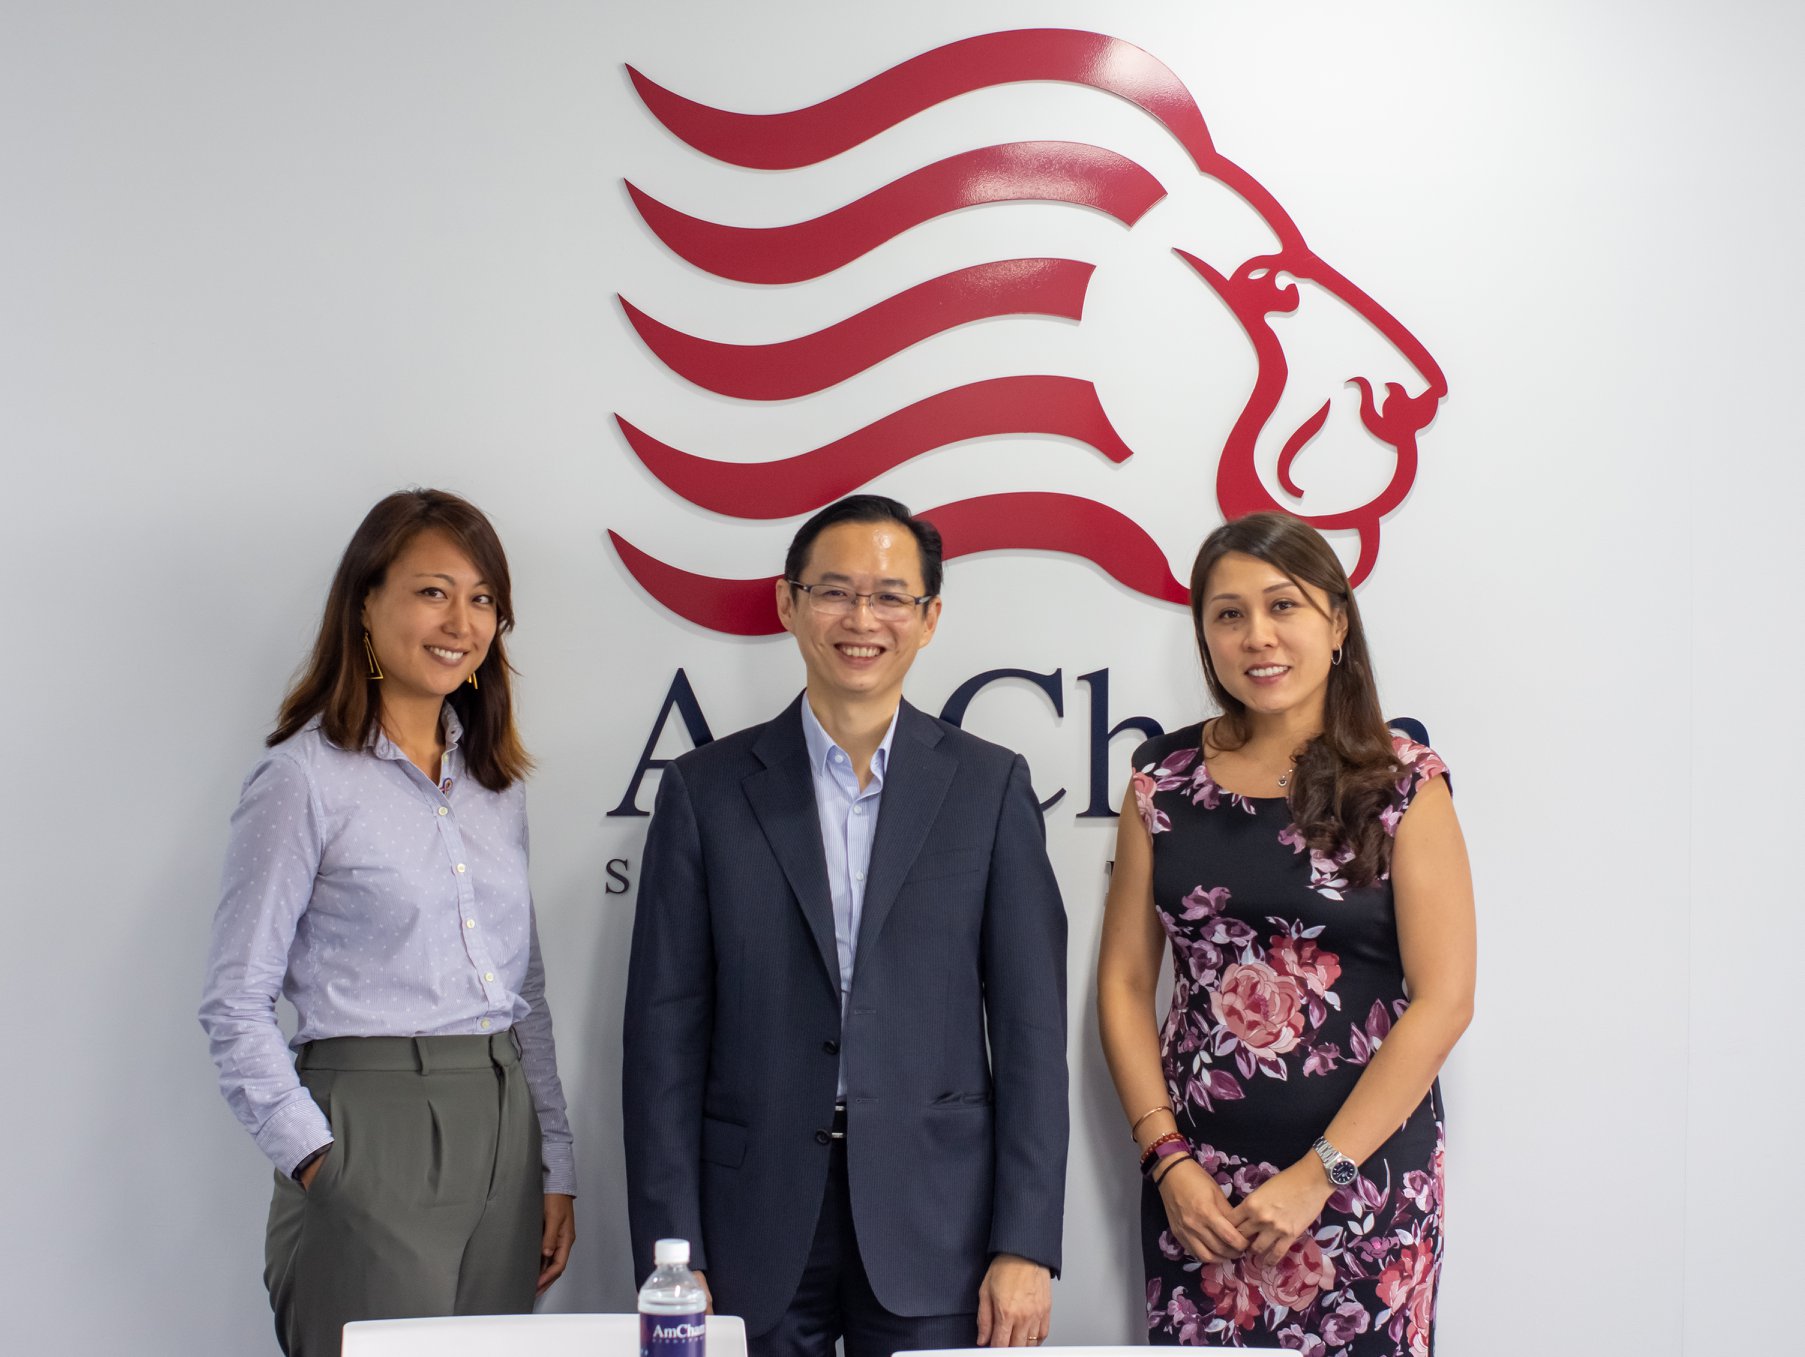 American Chamber of Commerce in Singapore